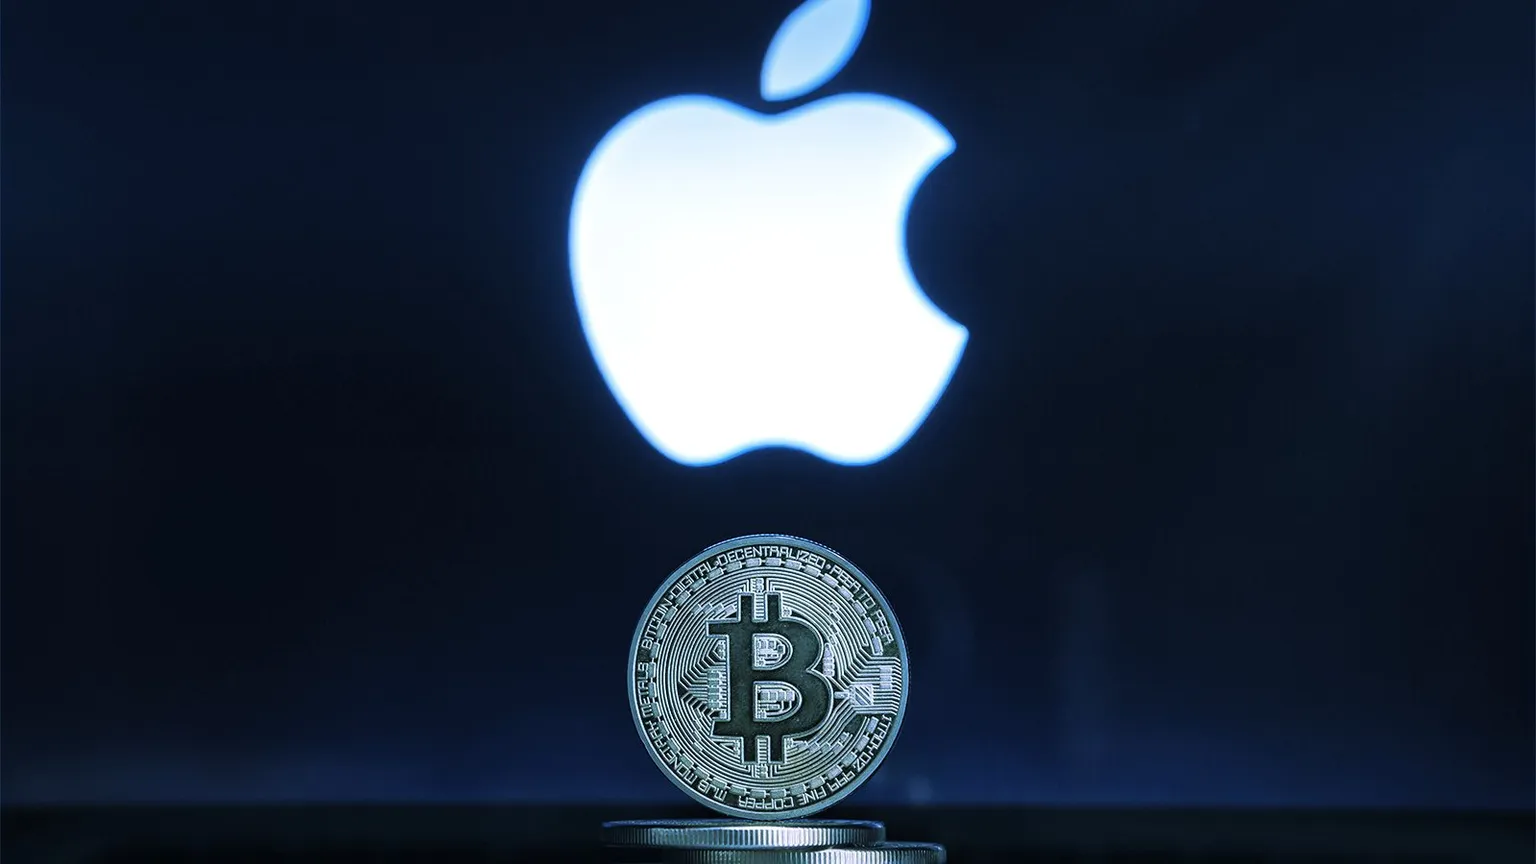 Slovenia / Ljublljana - 02 24 2019: Bitcoin on a stack of coins with Apple logo on a laptop screen.